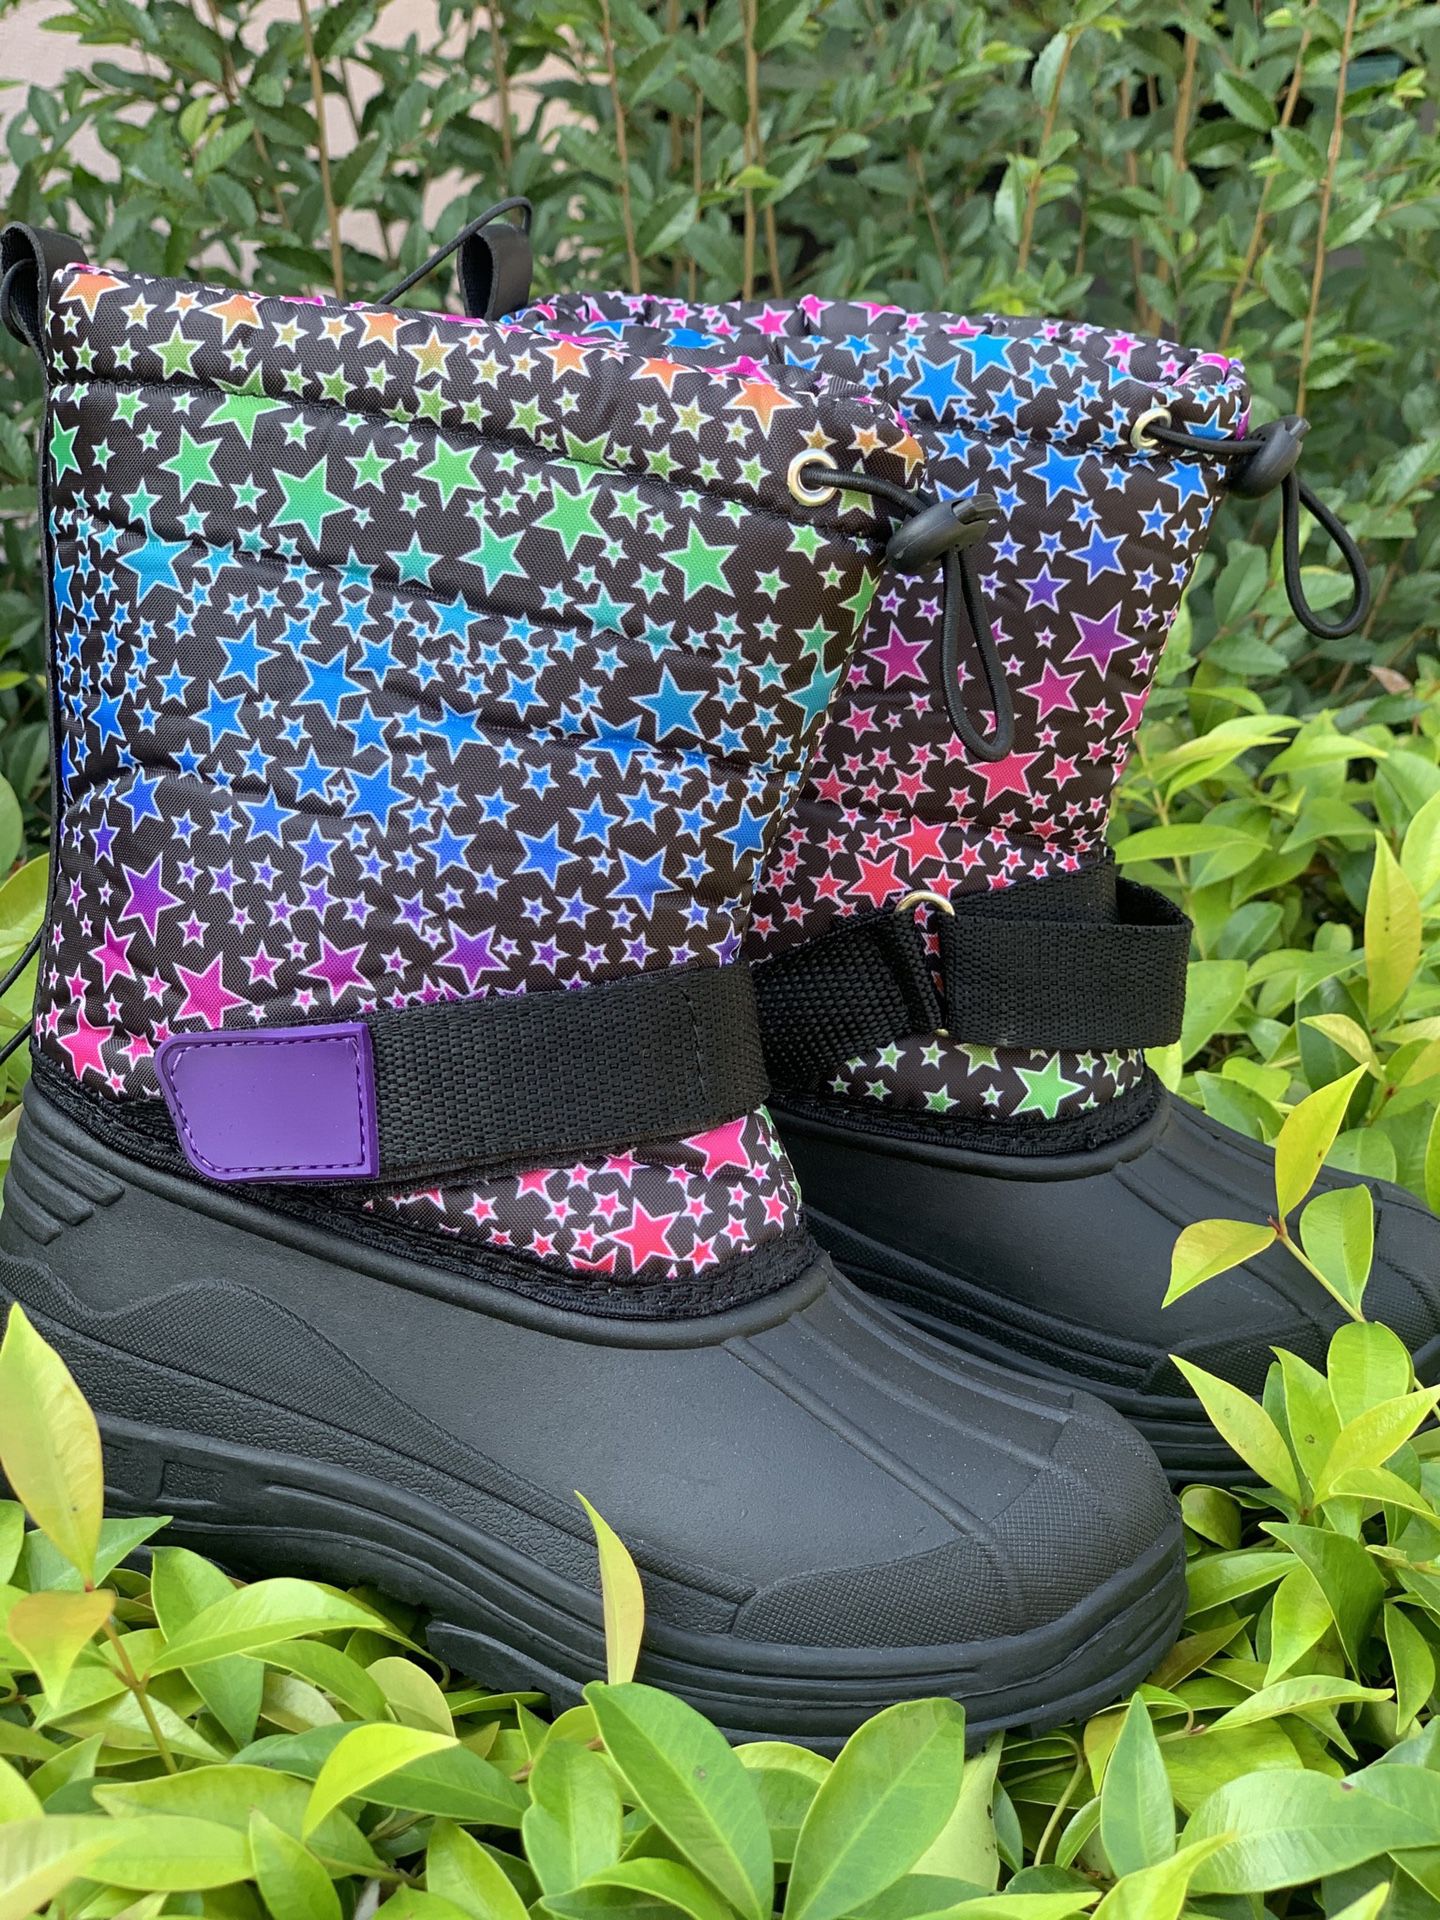 Snow boots for kids sizes 9,10,11,12,13,1,2,3,4 ... $25